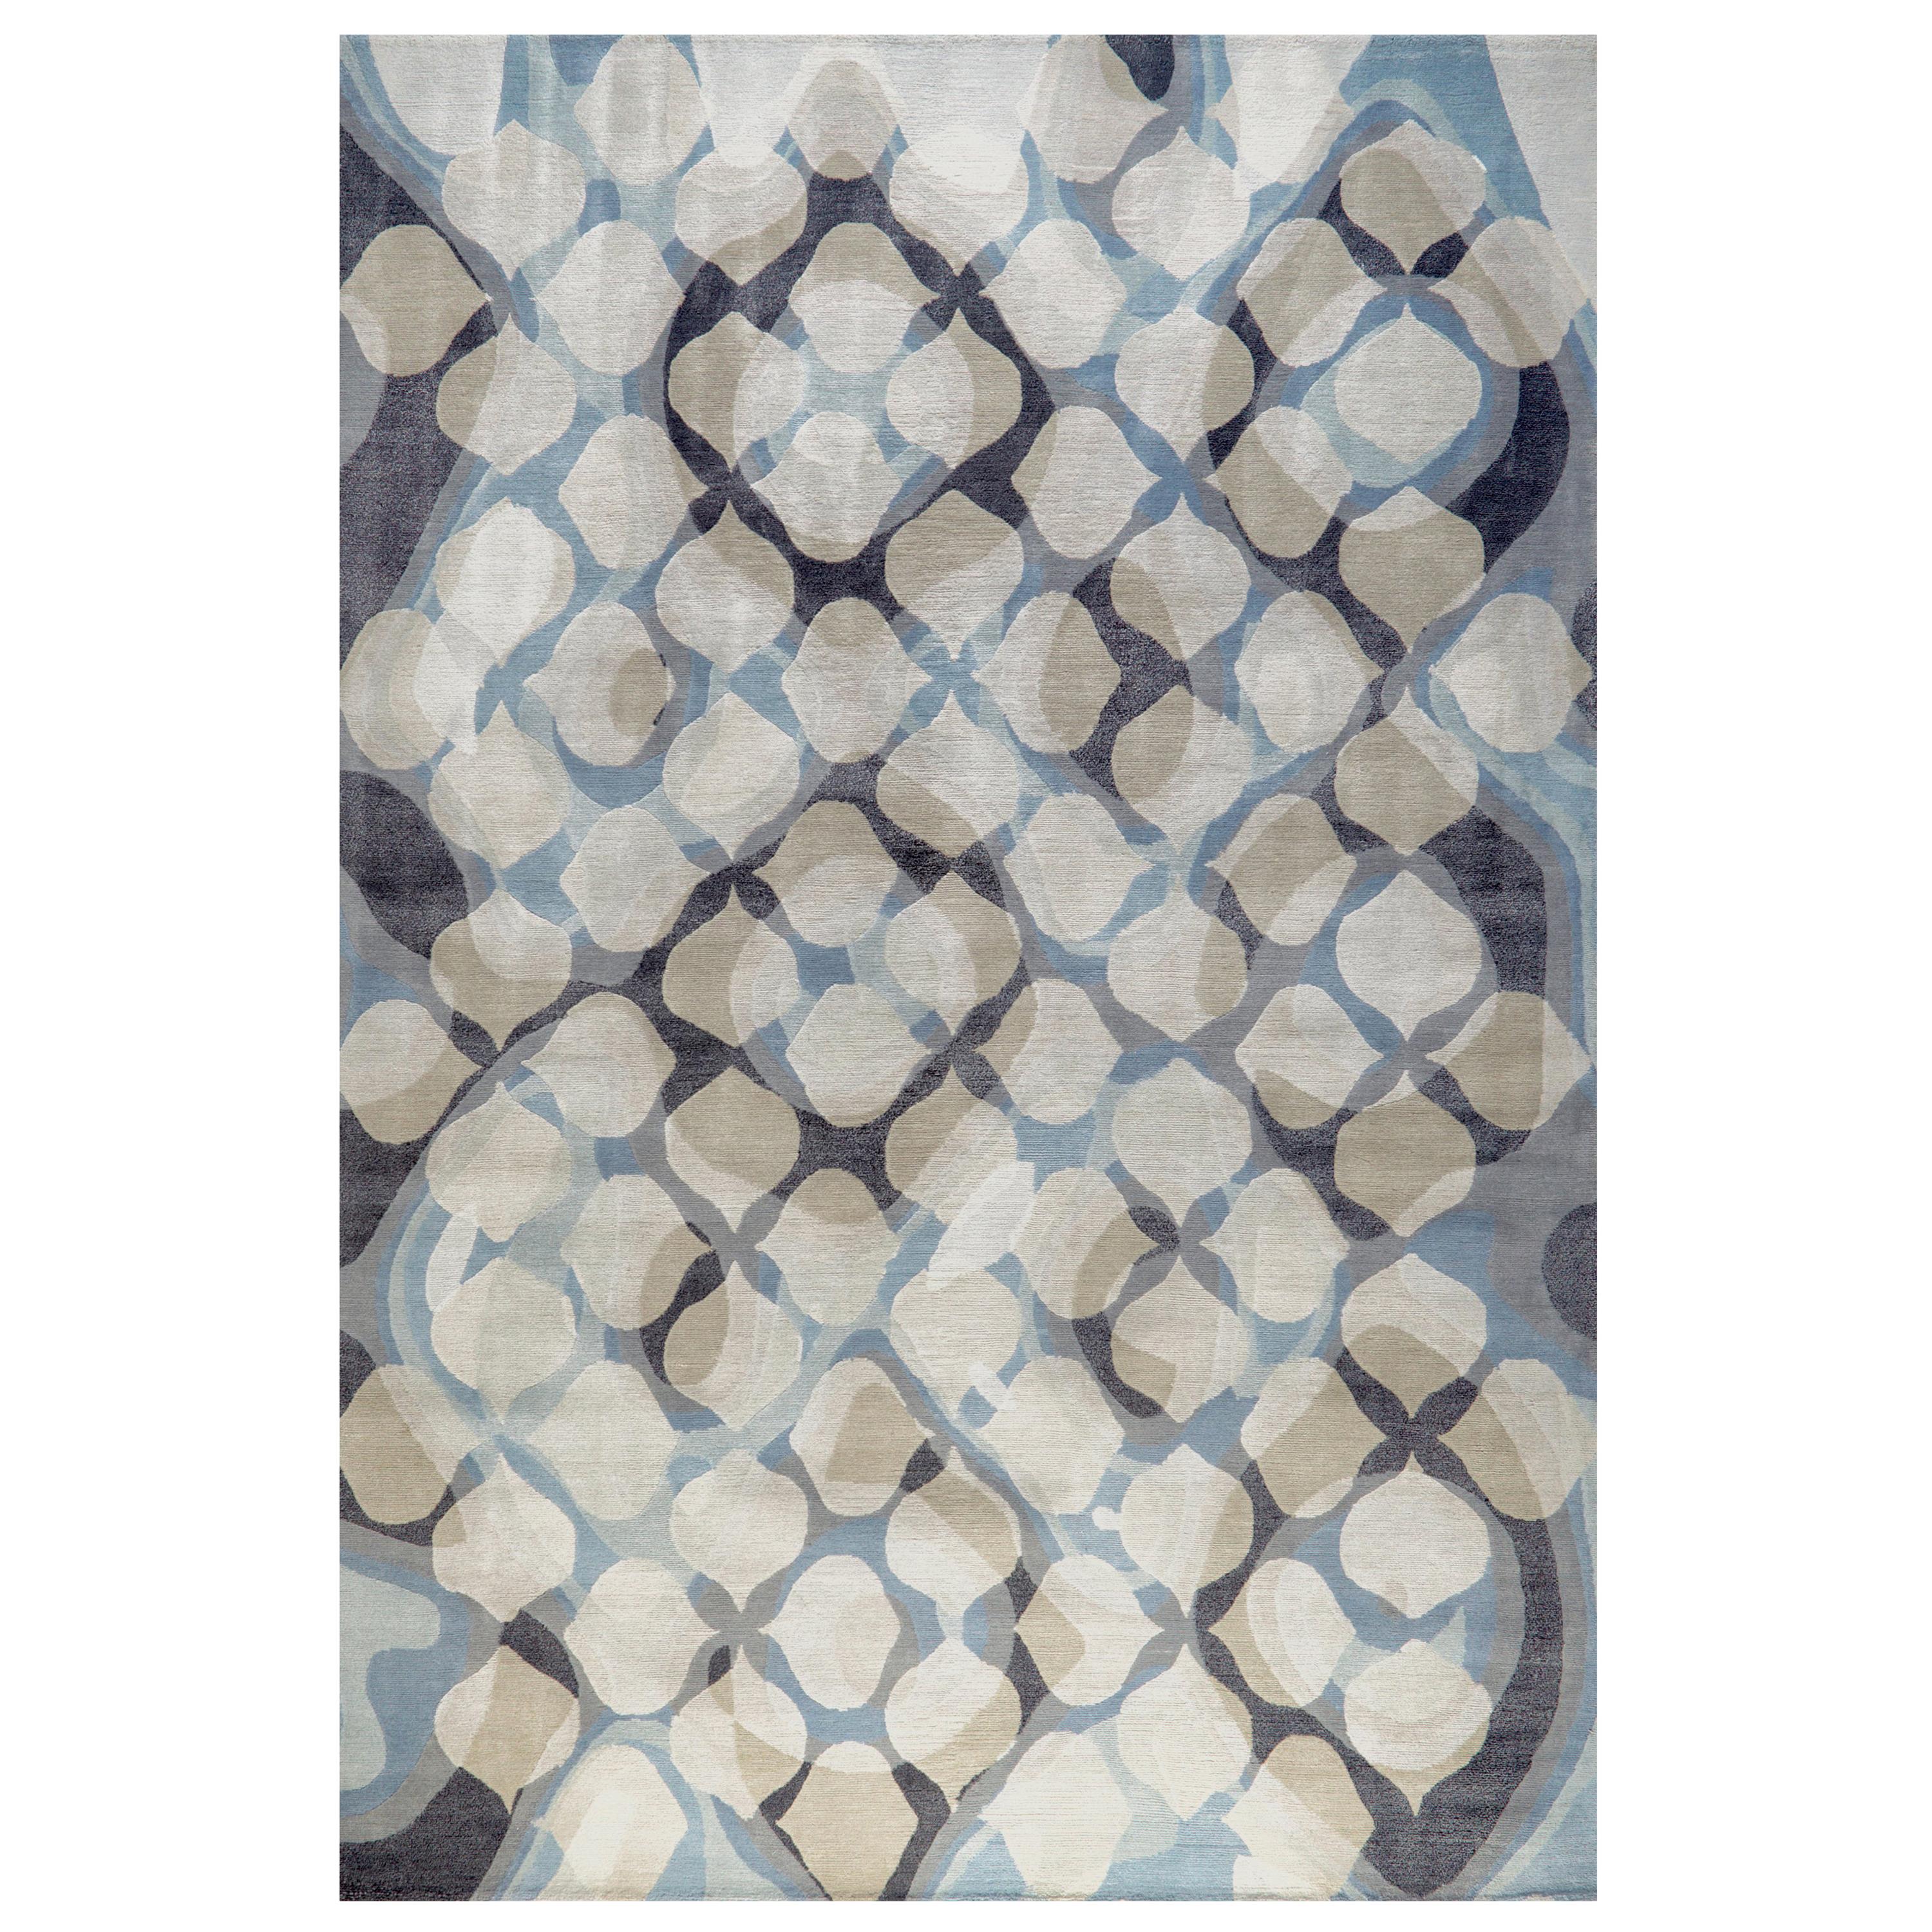 Contemporary Area Rug in Blue Black, Handmade of Silk, Wool, "Epic"